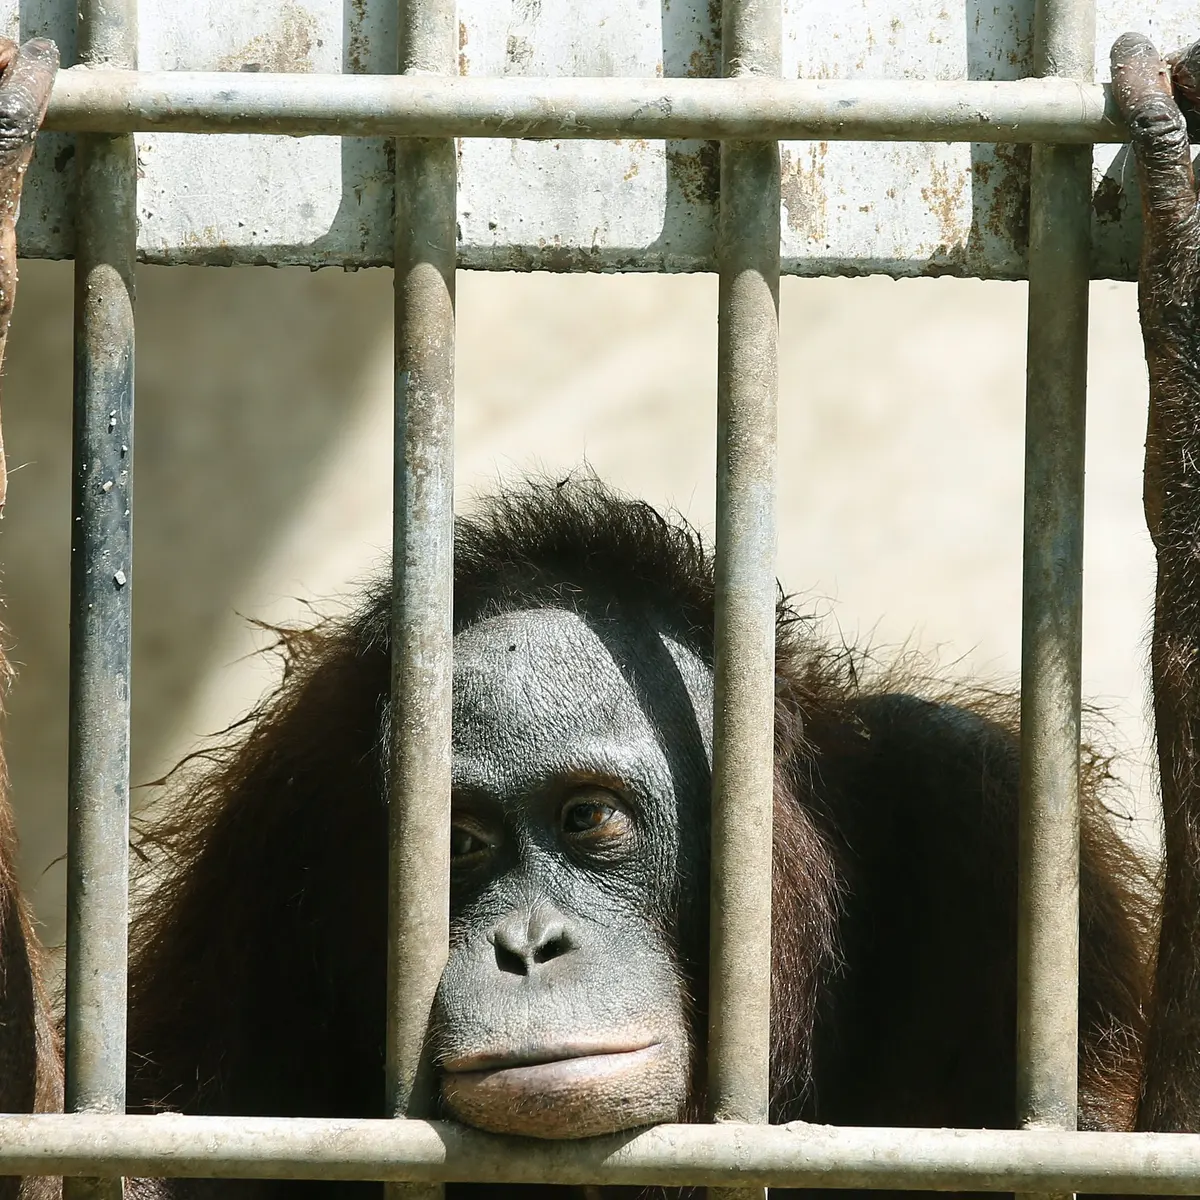 Should Government Ban Zoos?